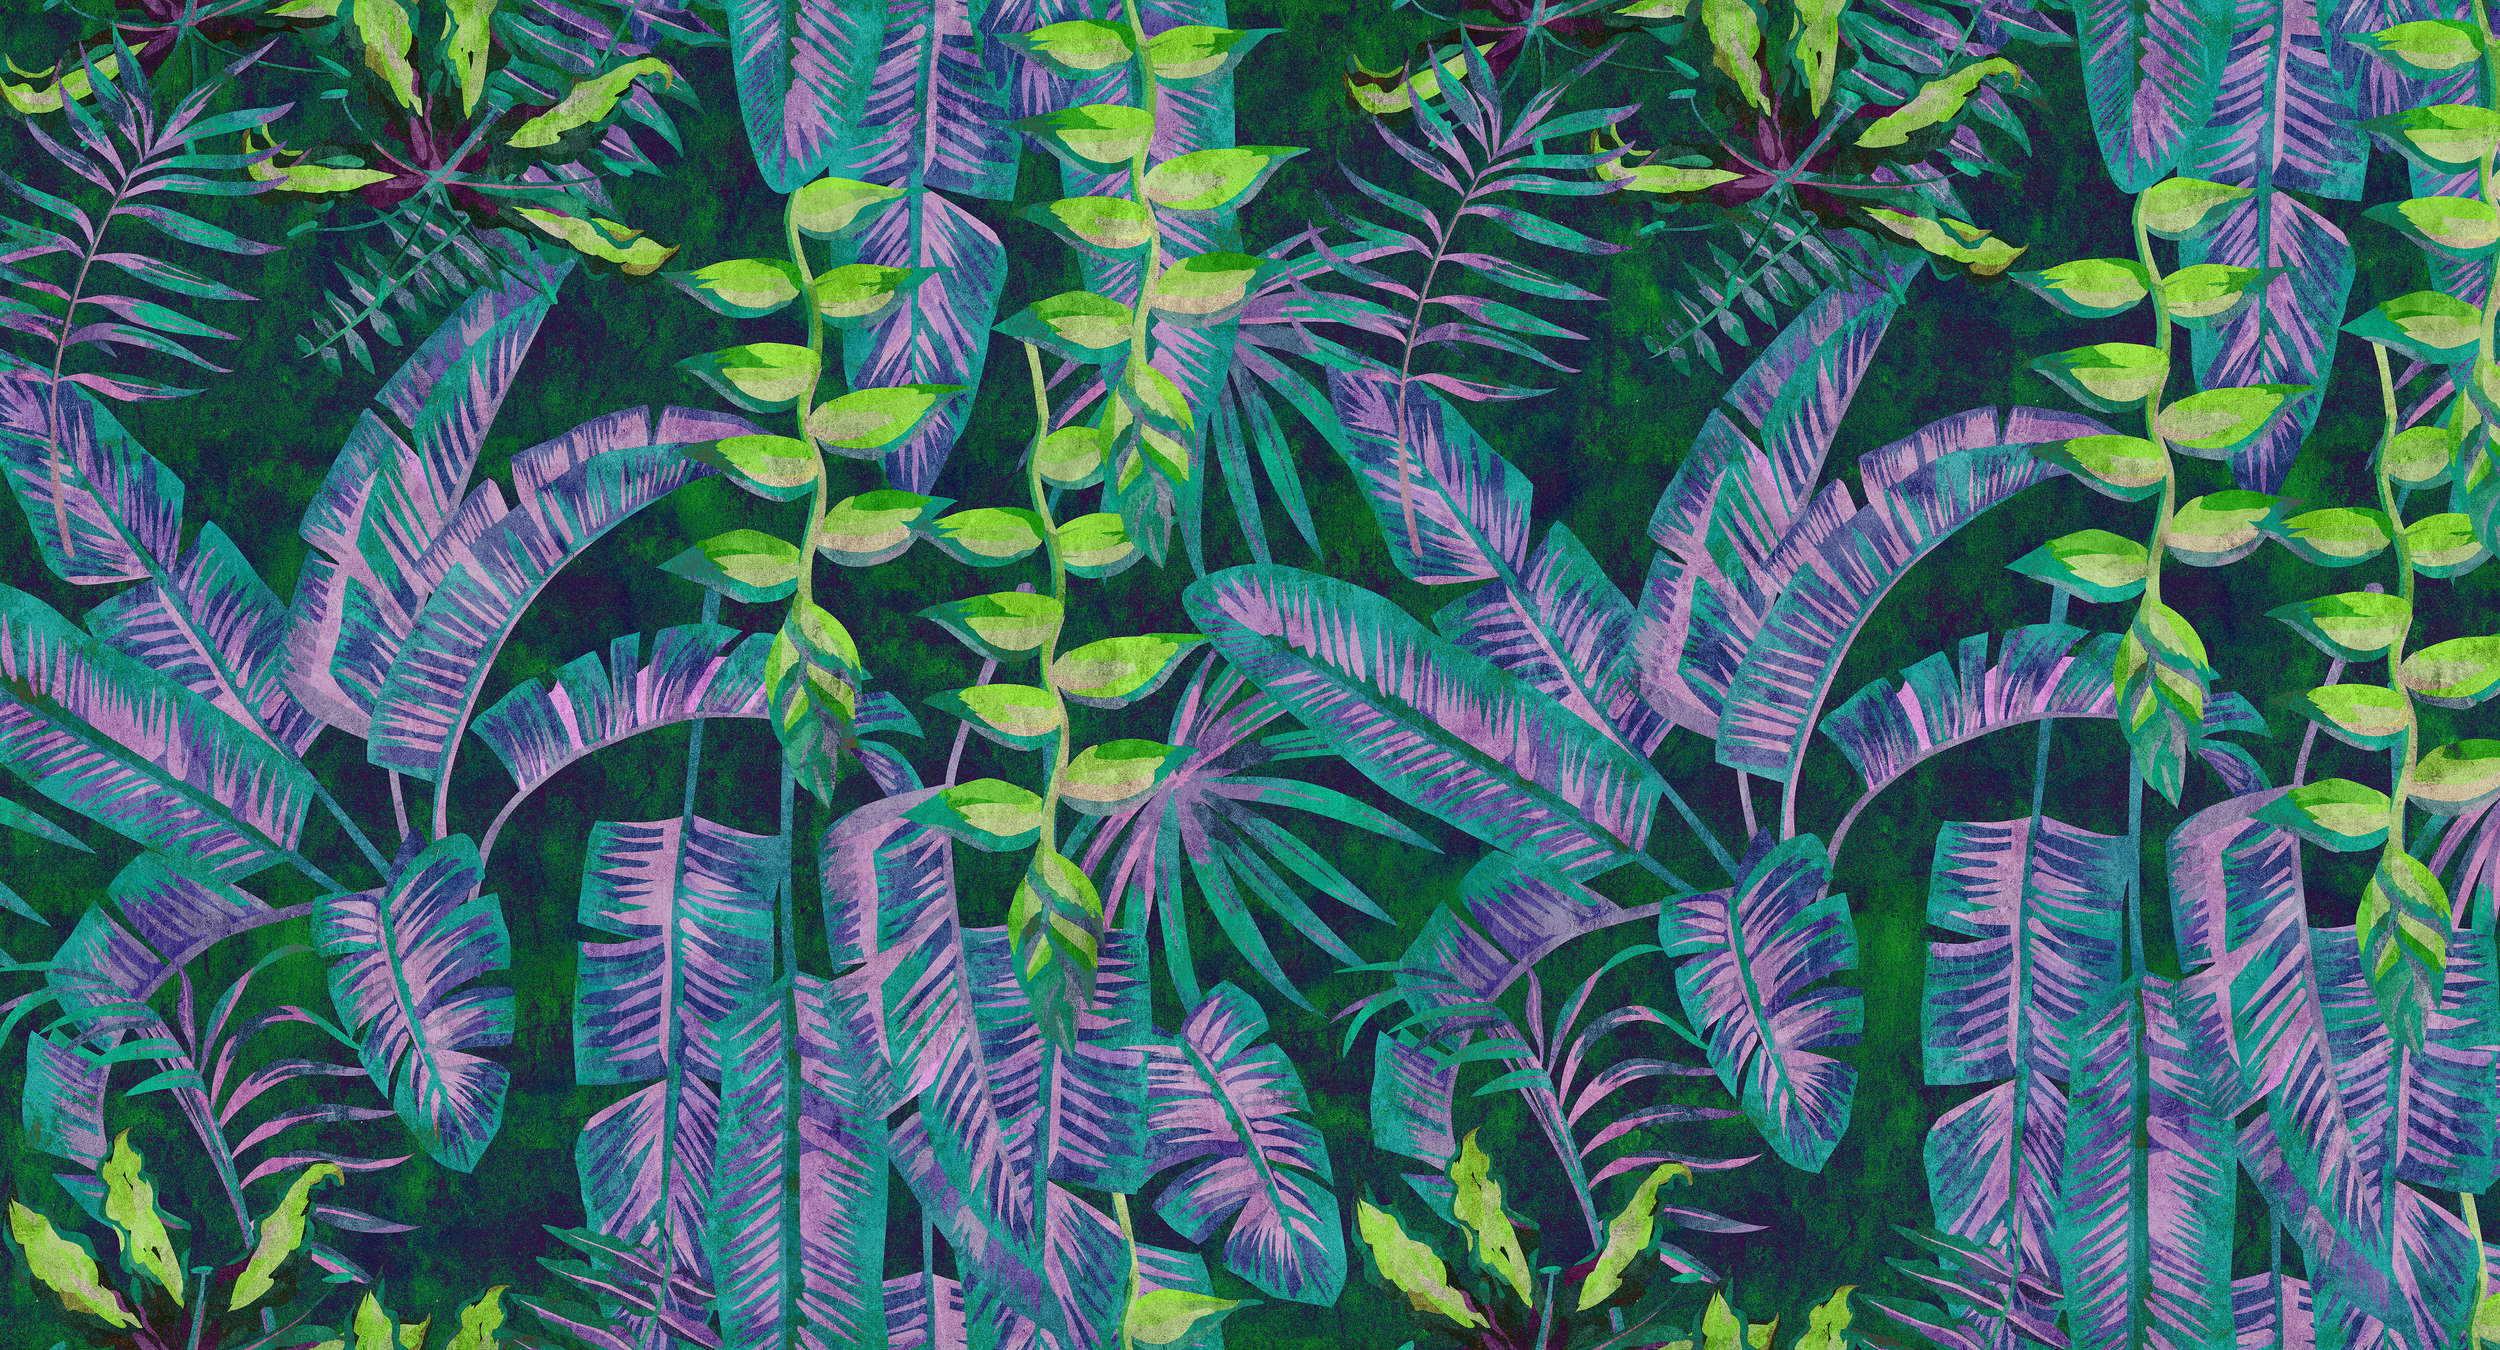             Tropicana 5 - Jungle wallpaper with neon colours in blotting paper structure - Blue, Green | Pearl smooth fleece
        